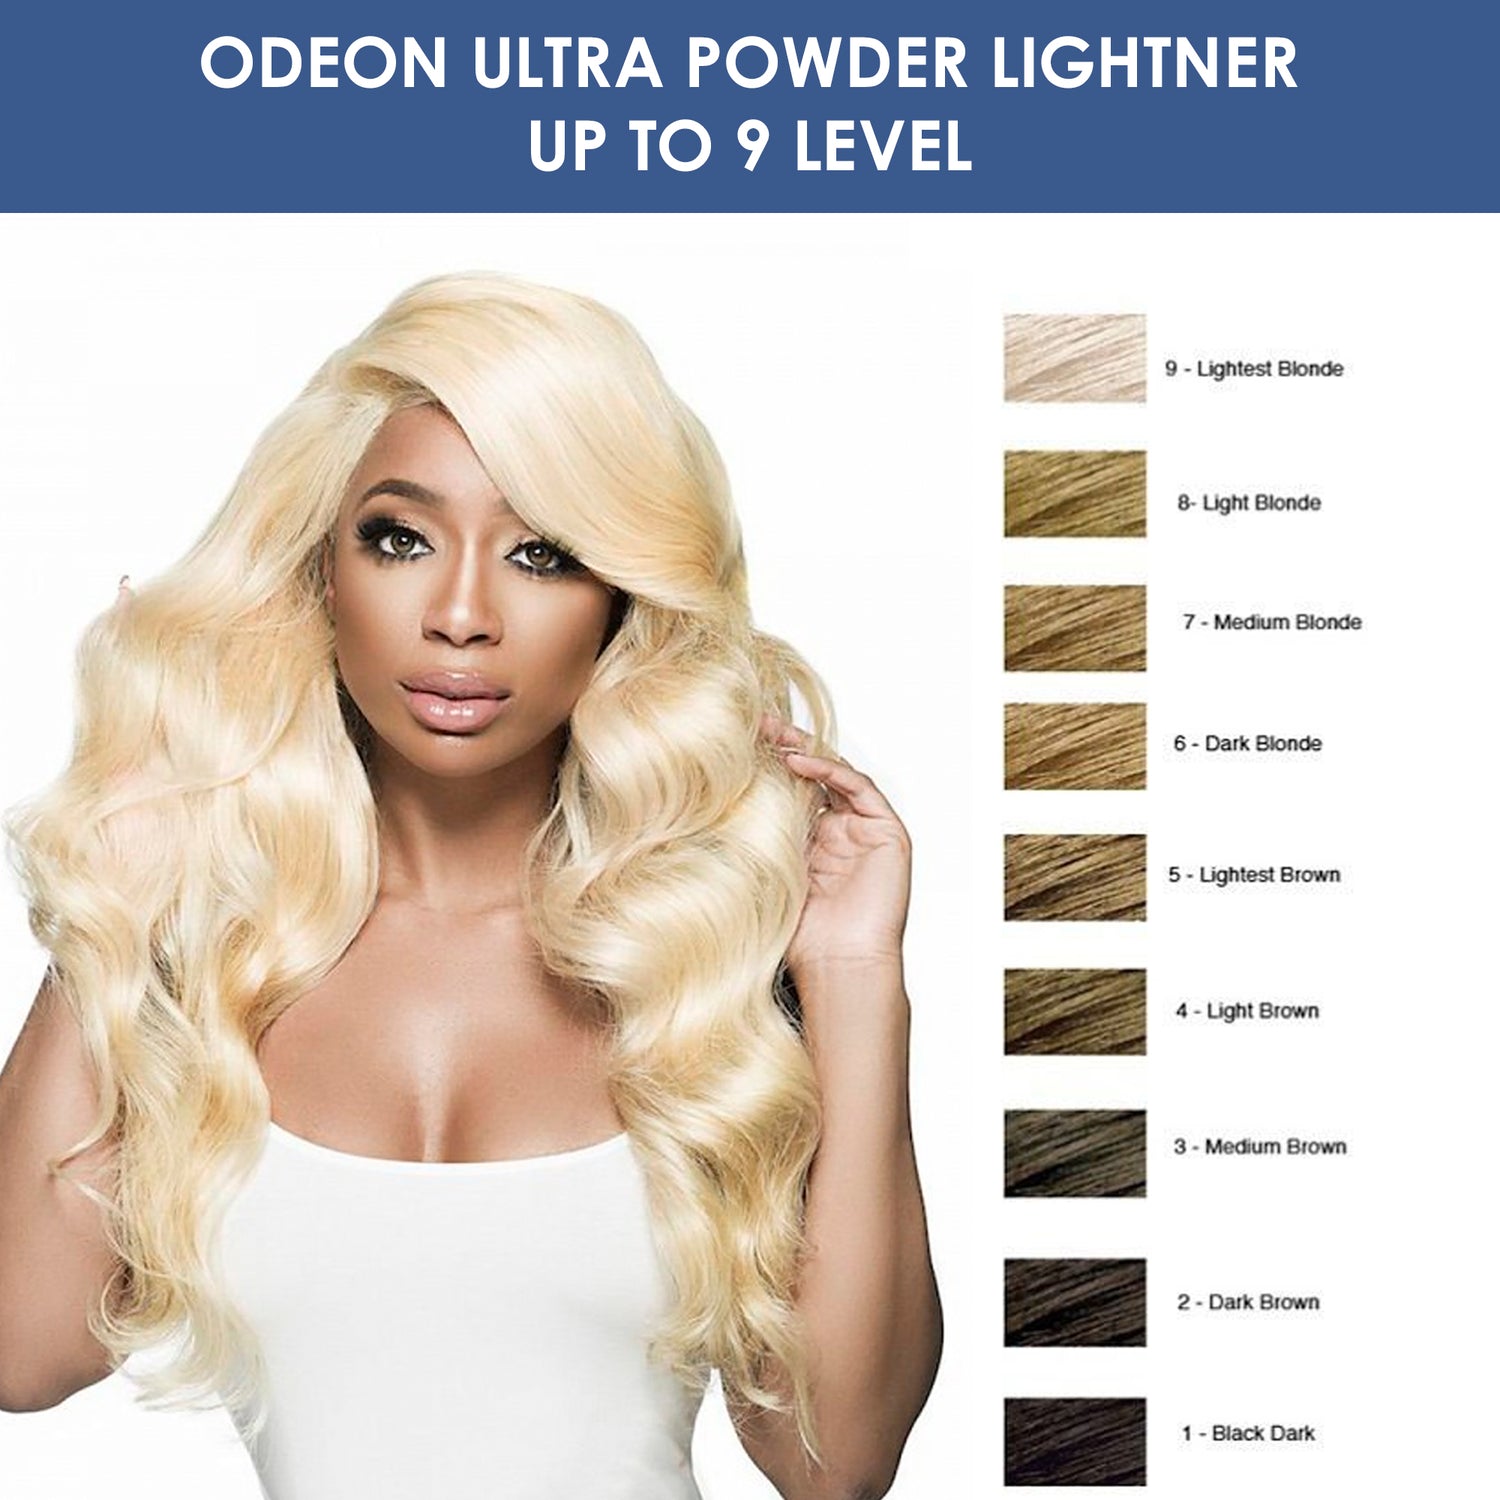 Odeon Professional Ultra-Lifting Powder Lightener Up to 9 Levels with Mixing Bowl and Dye Brush 16oz (500g)